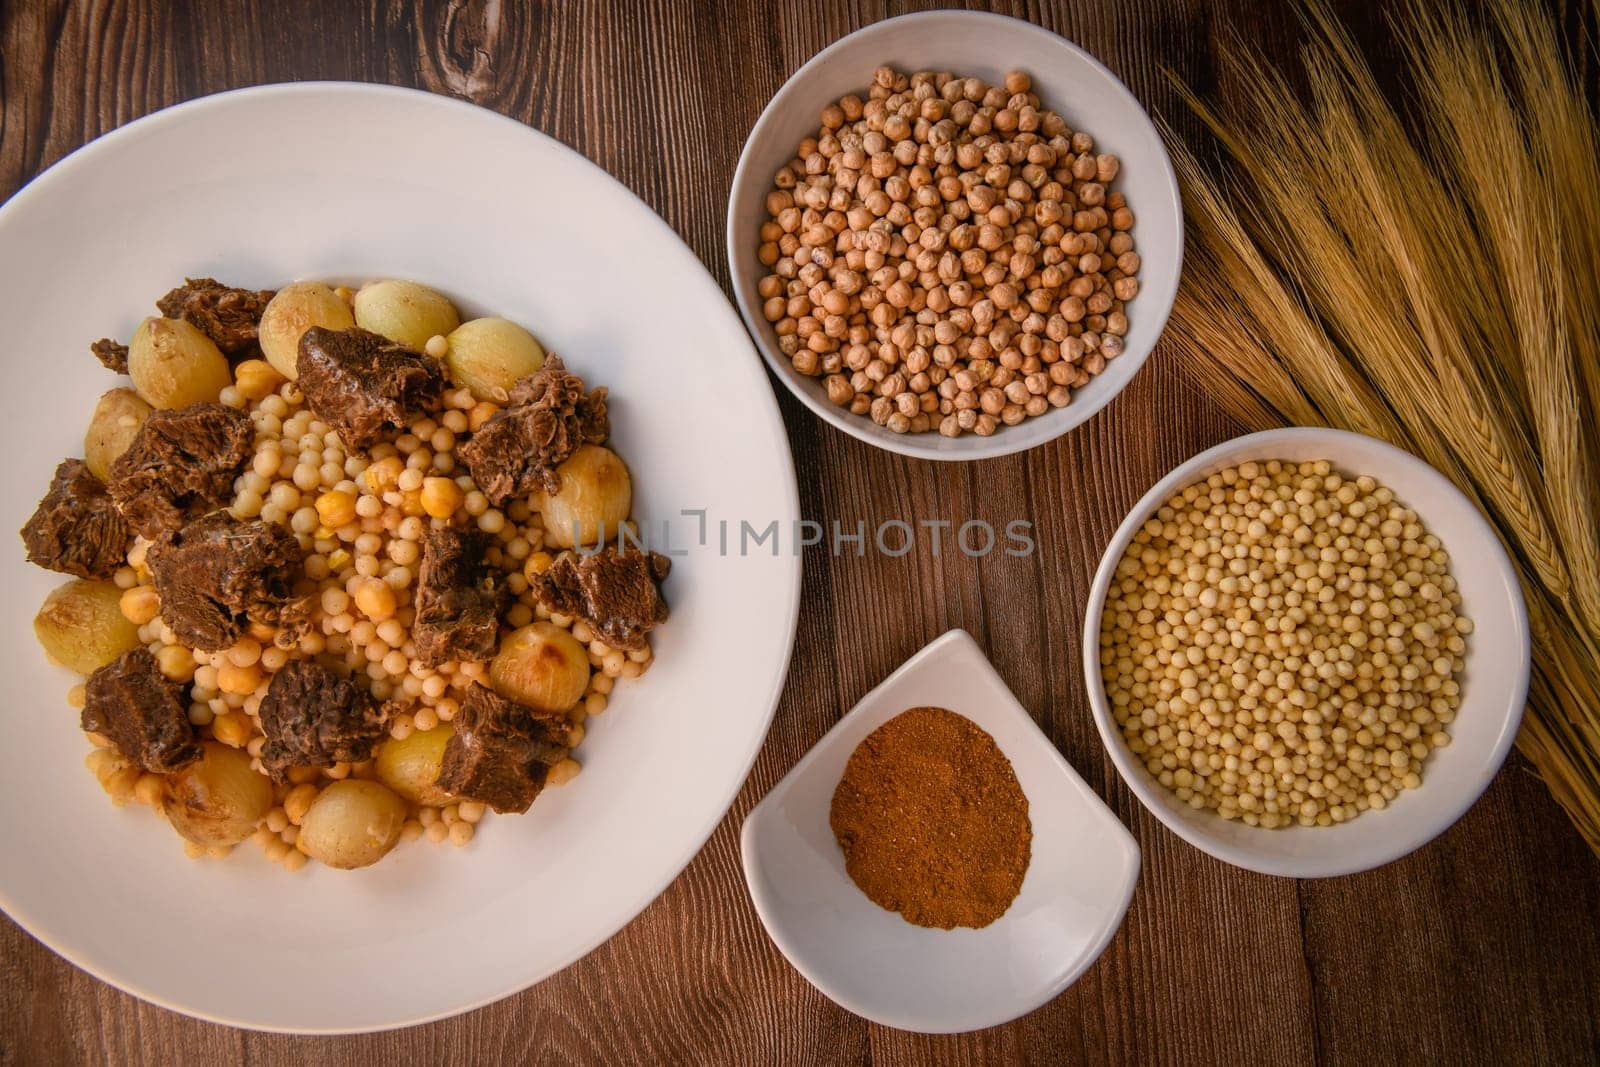 Moughrabieh is a popular dish, LEBANESE RECIPE FOR MOUGHRABIEH WITH BEEF AND SMALL ONIONS, SEMOLINA PEARLS AND CHICKPEAS by FreeProd